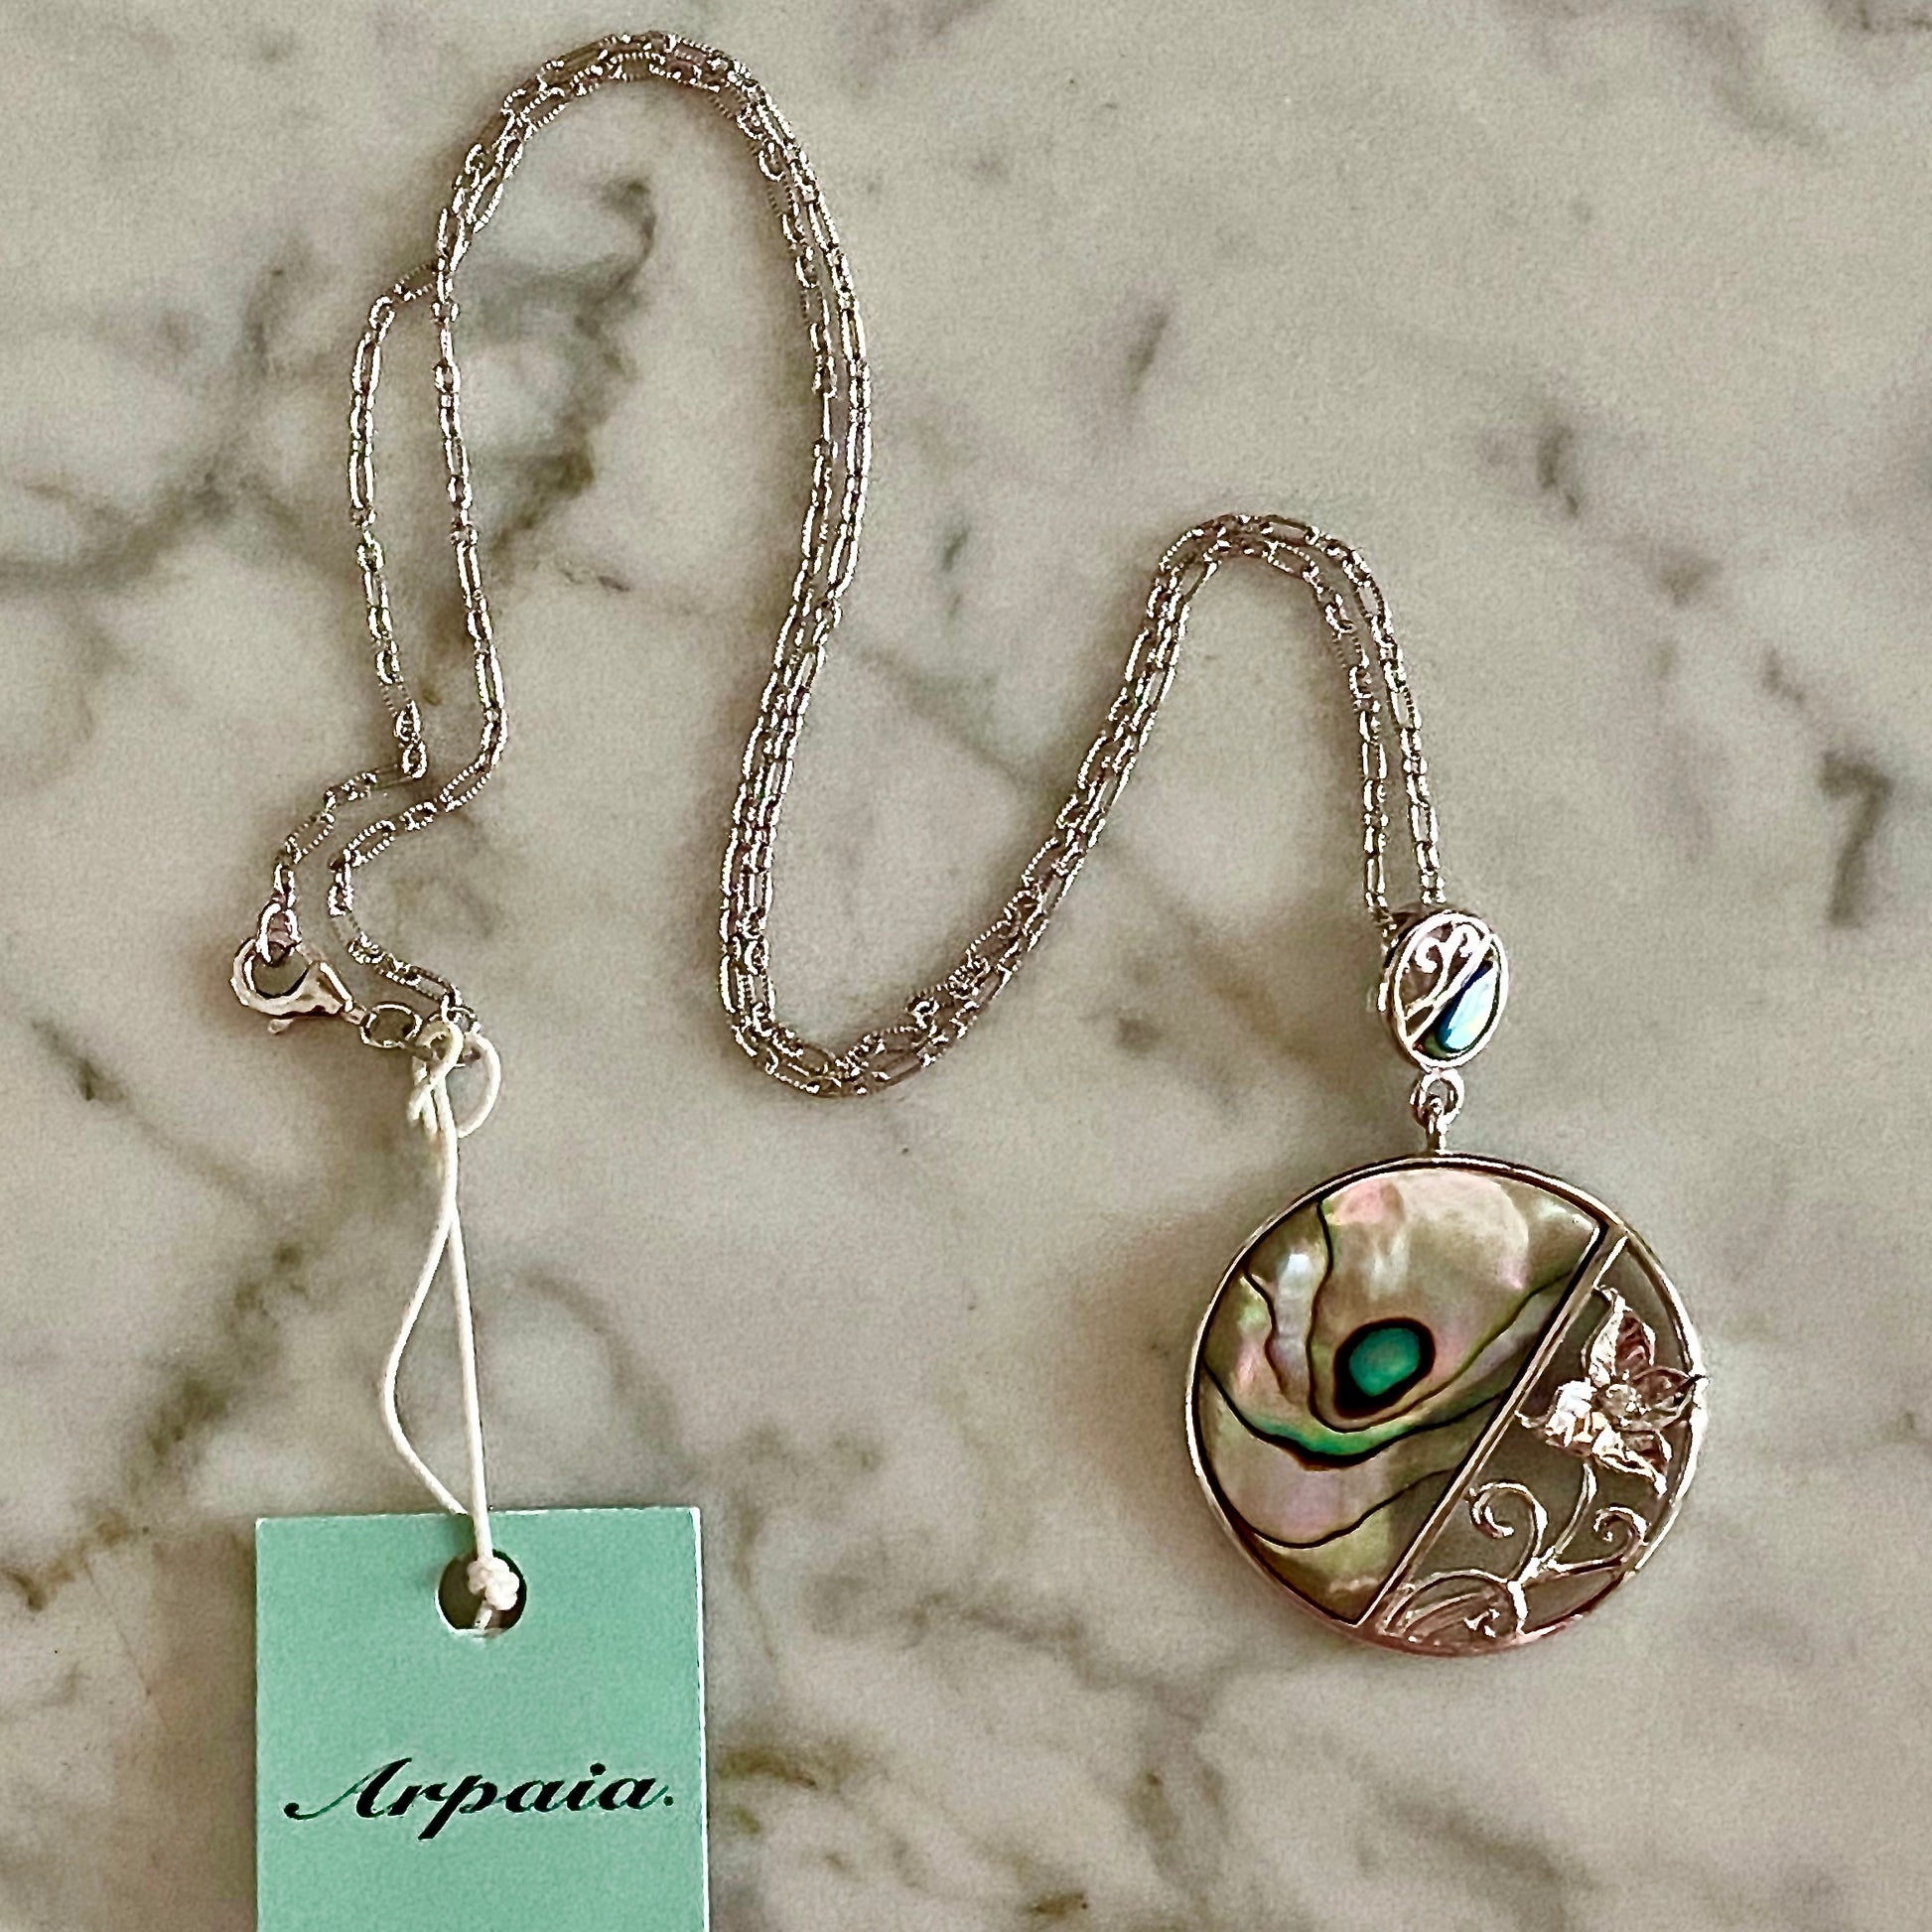 Abalone & Silver Flower Pendant on 18" Textured Chain / Arpaia Jewelry